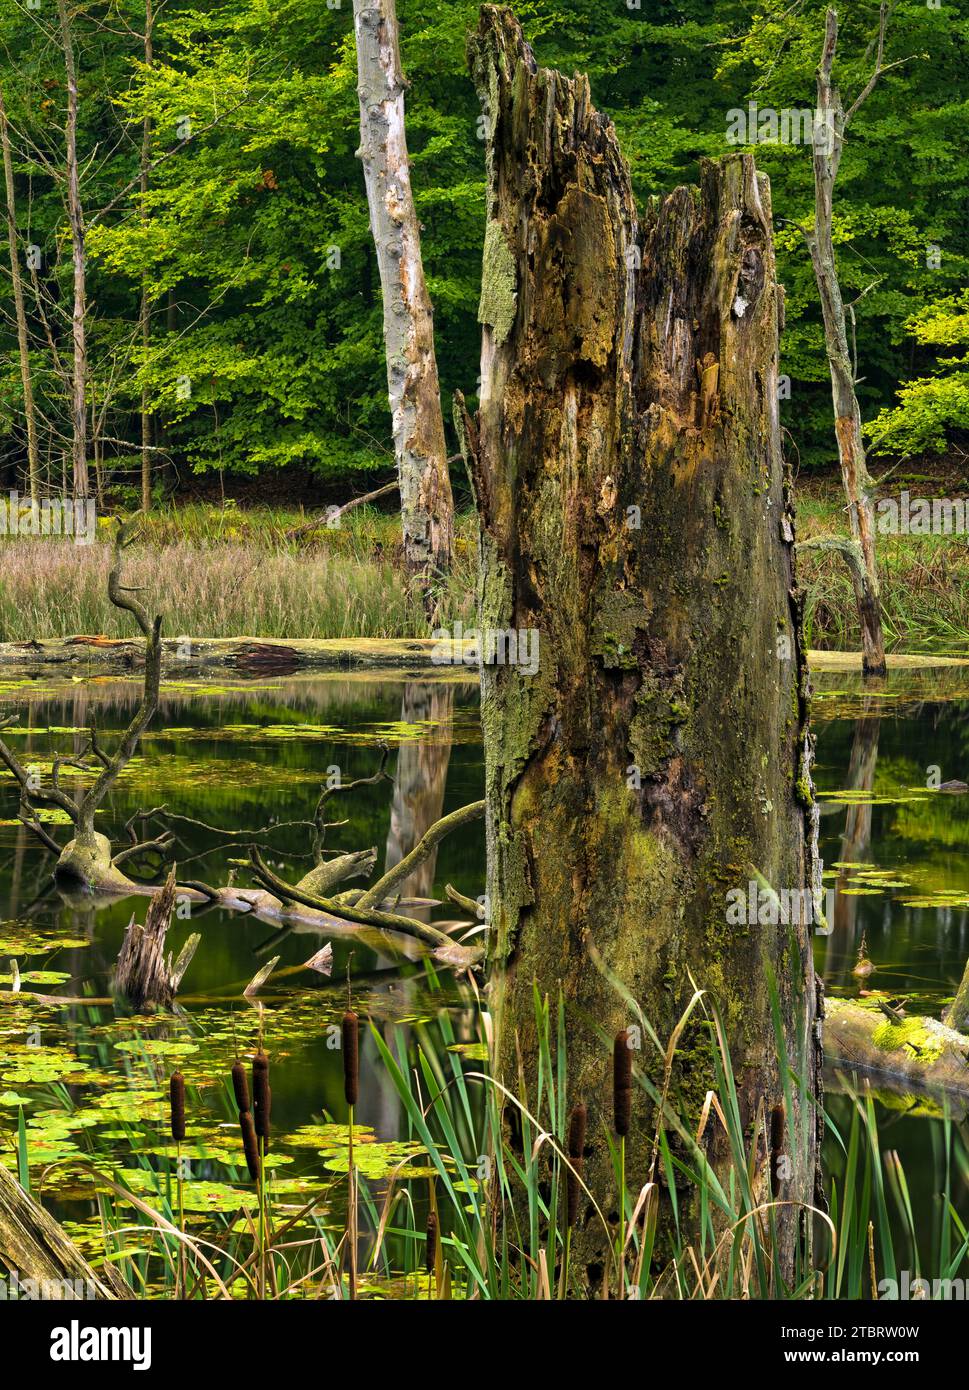 Europe, Germany, Northern Germany, Mecklenburg-Western Pomerania, Mecklenburg Lake District, Müritz National Park, Serrahn Beech Forest UNESCO World Heritage Site, Deadwood and water lilies at Schweingartensee lake Stock Photo